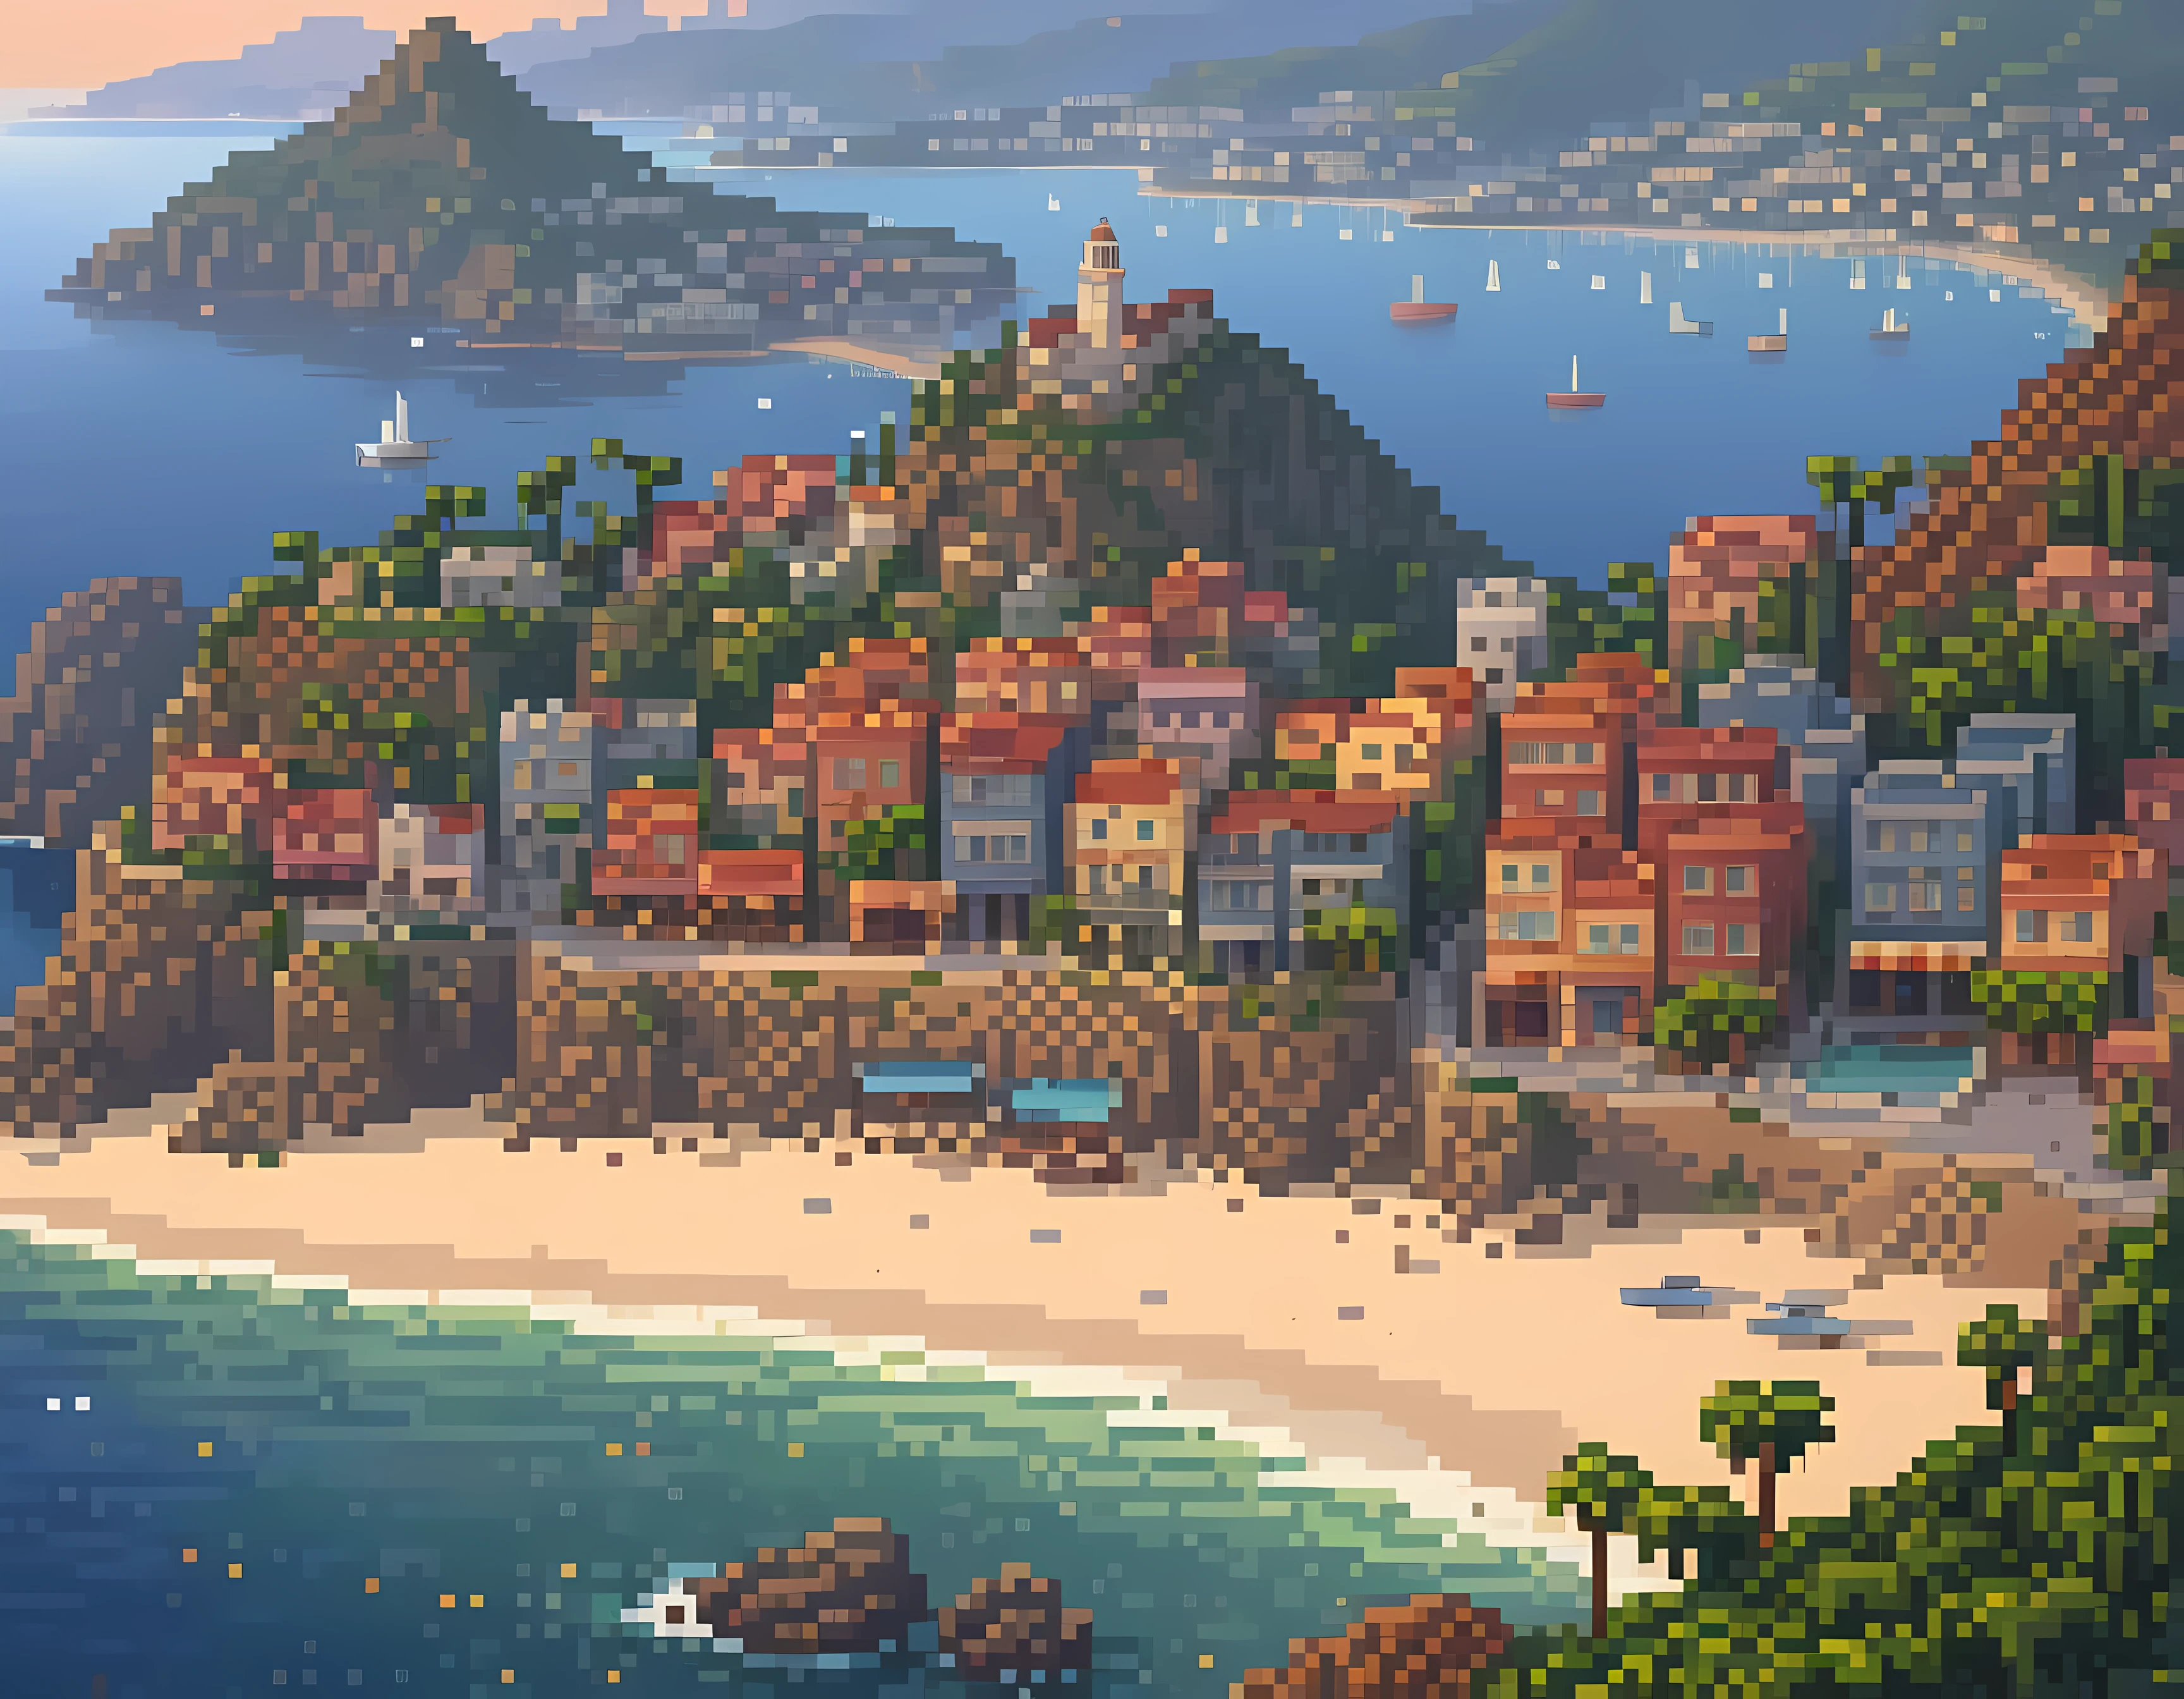 Pixel art, masterpiece in maximum 16K resolution, superb quality, a stunning ((aerial view)) of a coastal city nestled between mountains and the ocean, iconic landmarks, vibrant neighborhoods, golden hour lighting and atmospheric haze to create a sense of depth and dimension, intricate details of the buildings and streets, harmonious color scheme. | ((More_Detail))